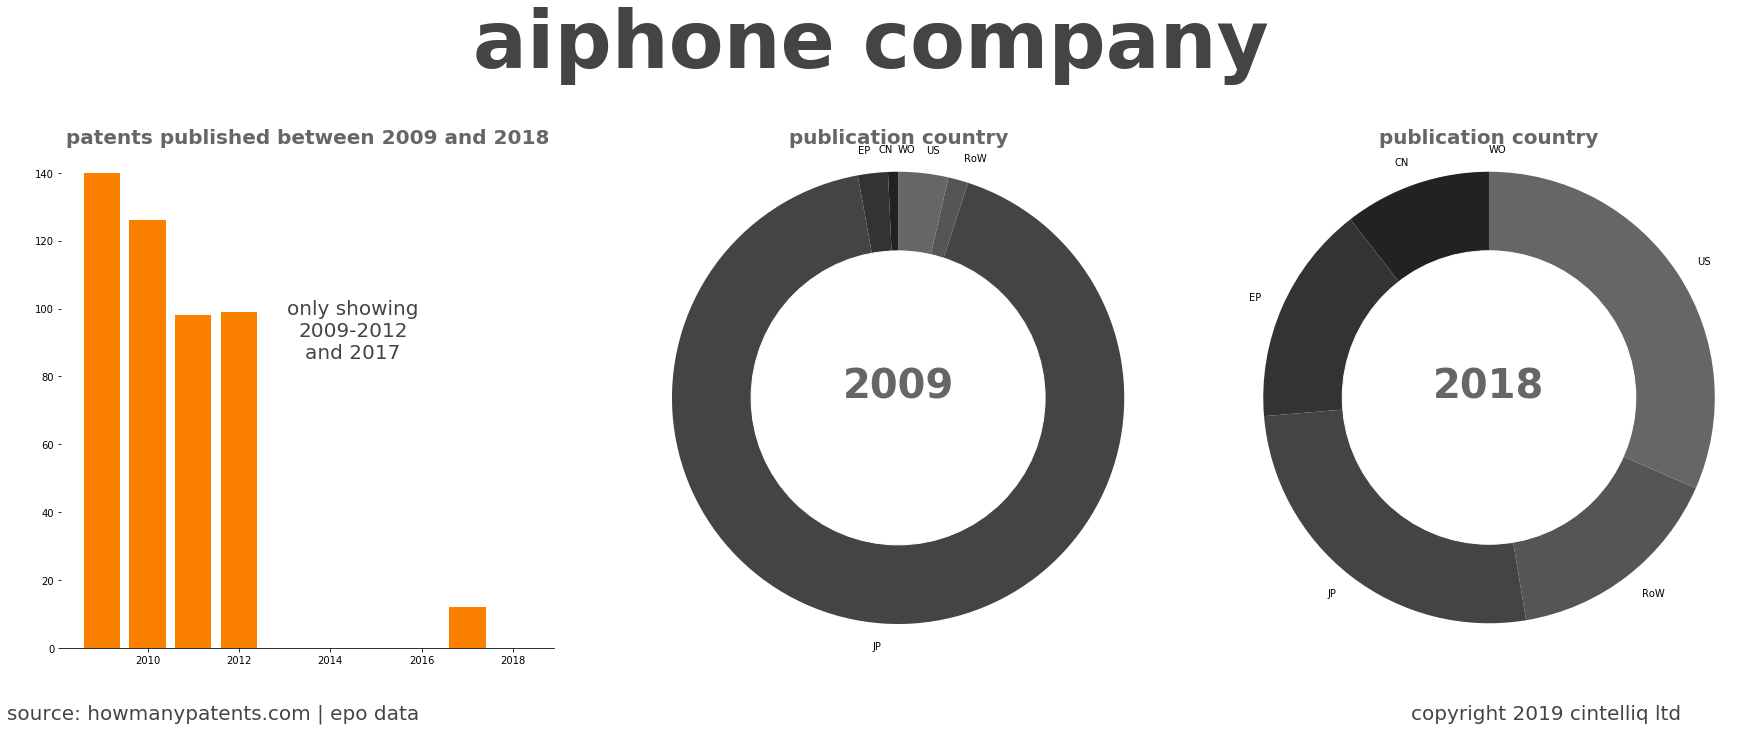 summary of patents for Aiphone Company